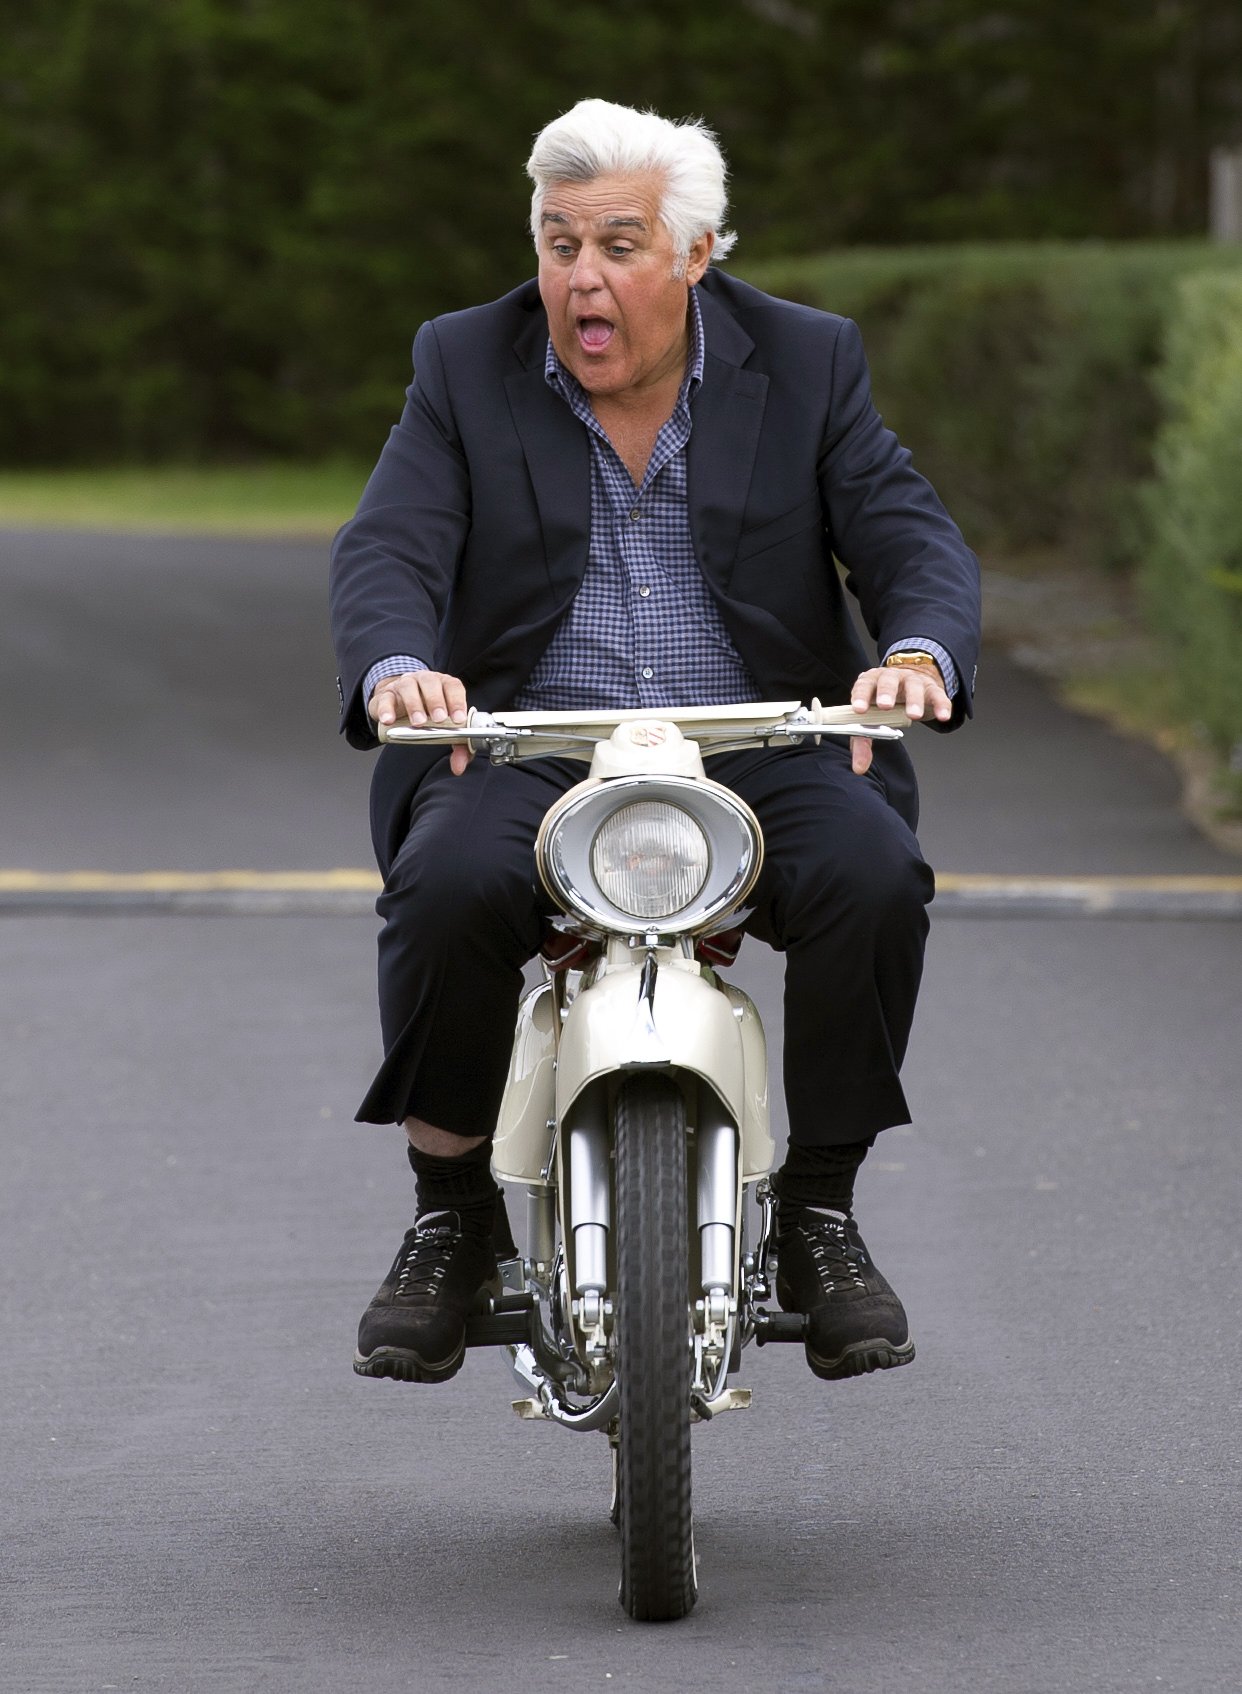 Jay Leno rides a 1964 Zweirad Union Kavalier Type 115 motorcycle during the 2014 Pebble Beach Concours d'Elegance in Pebble Beach, California on August 17, 2014 | Source: Getty Images